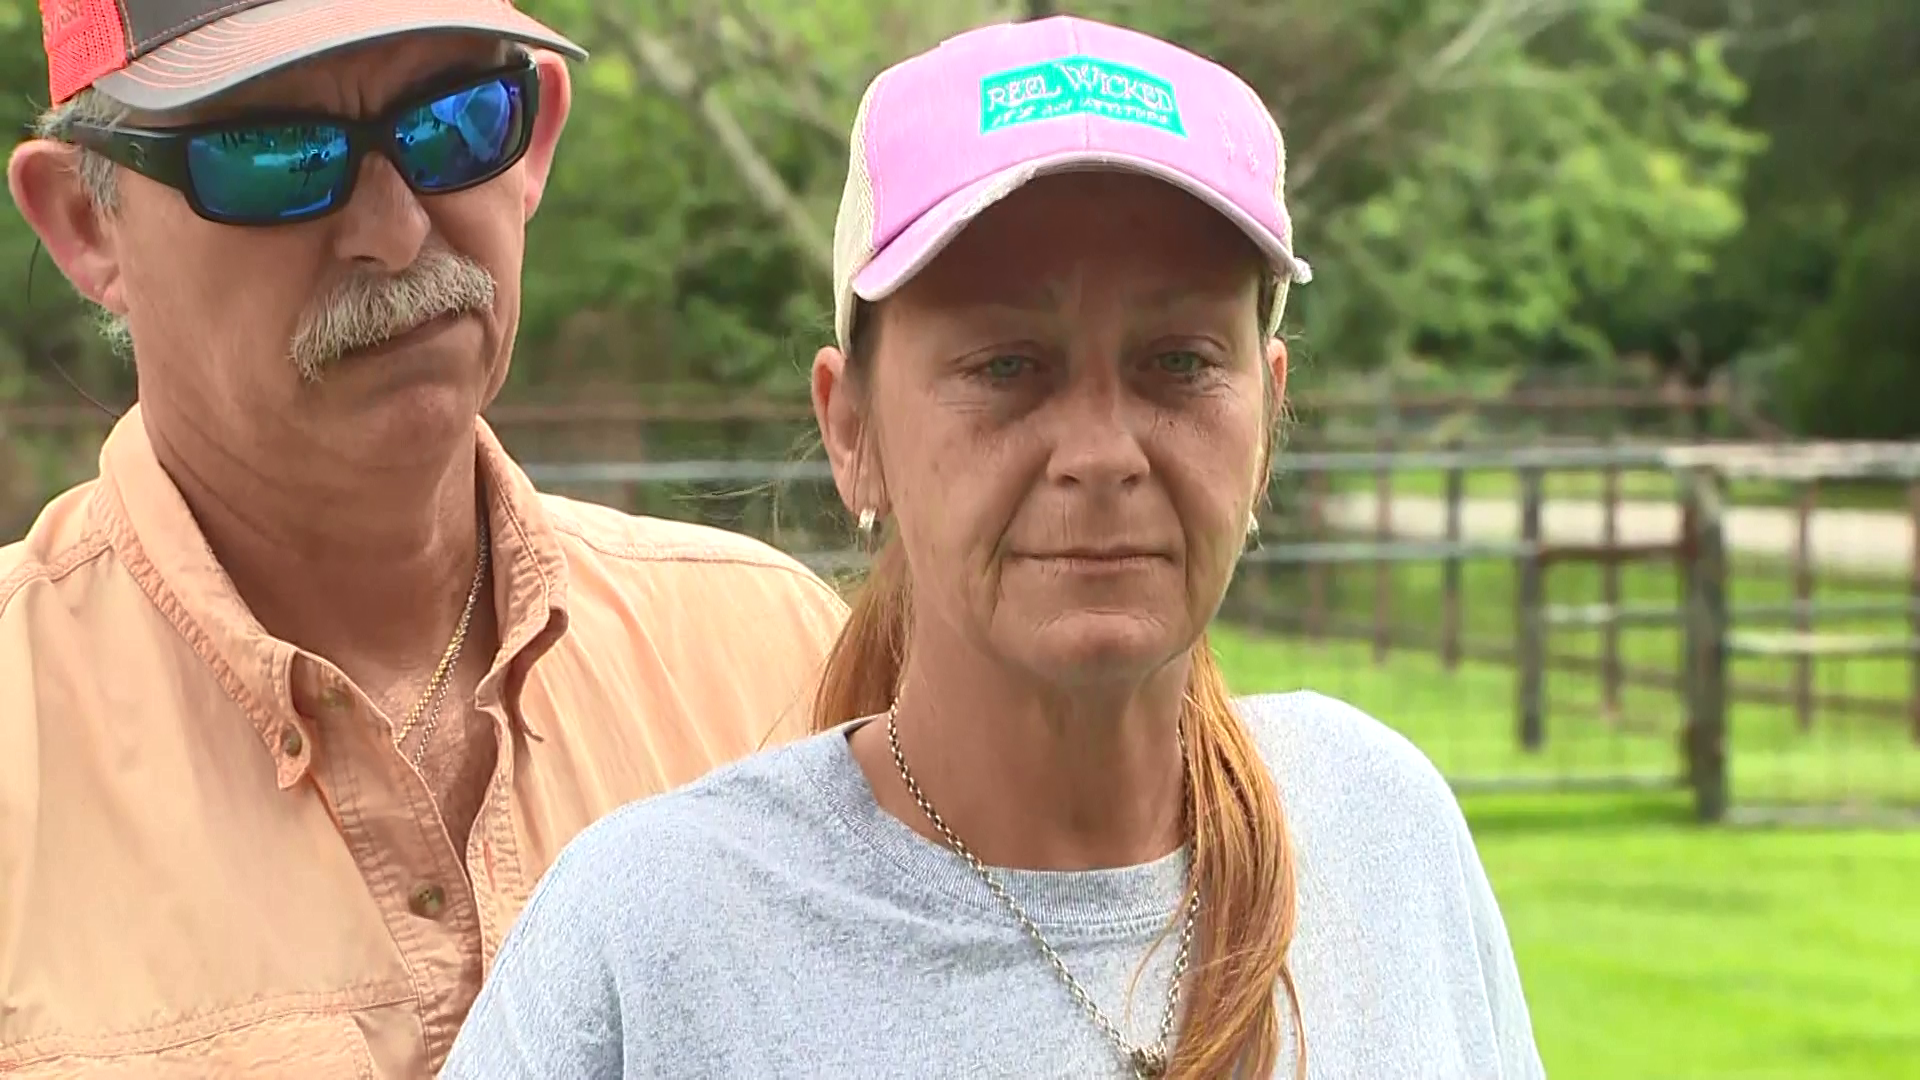 The grandmother of Samuel Olson, a missing 6-year-old who was last seen in southwest Houston, spoke Tuesday about the search for her grandson.